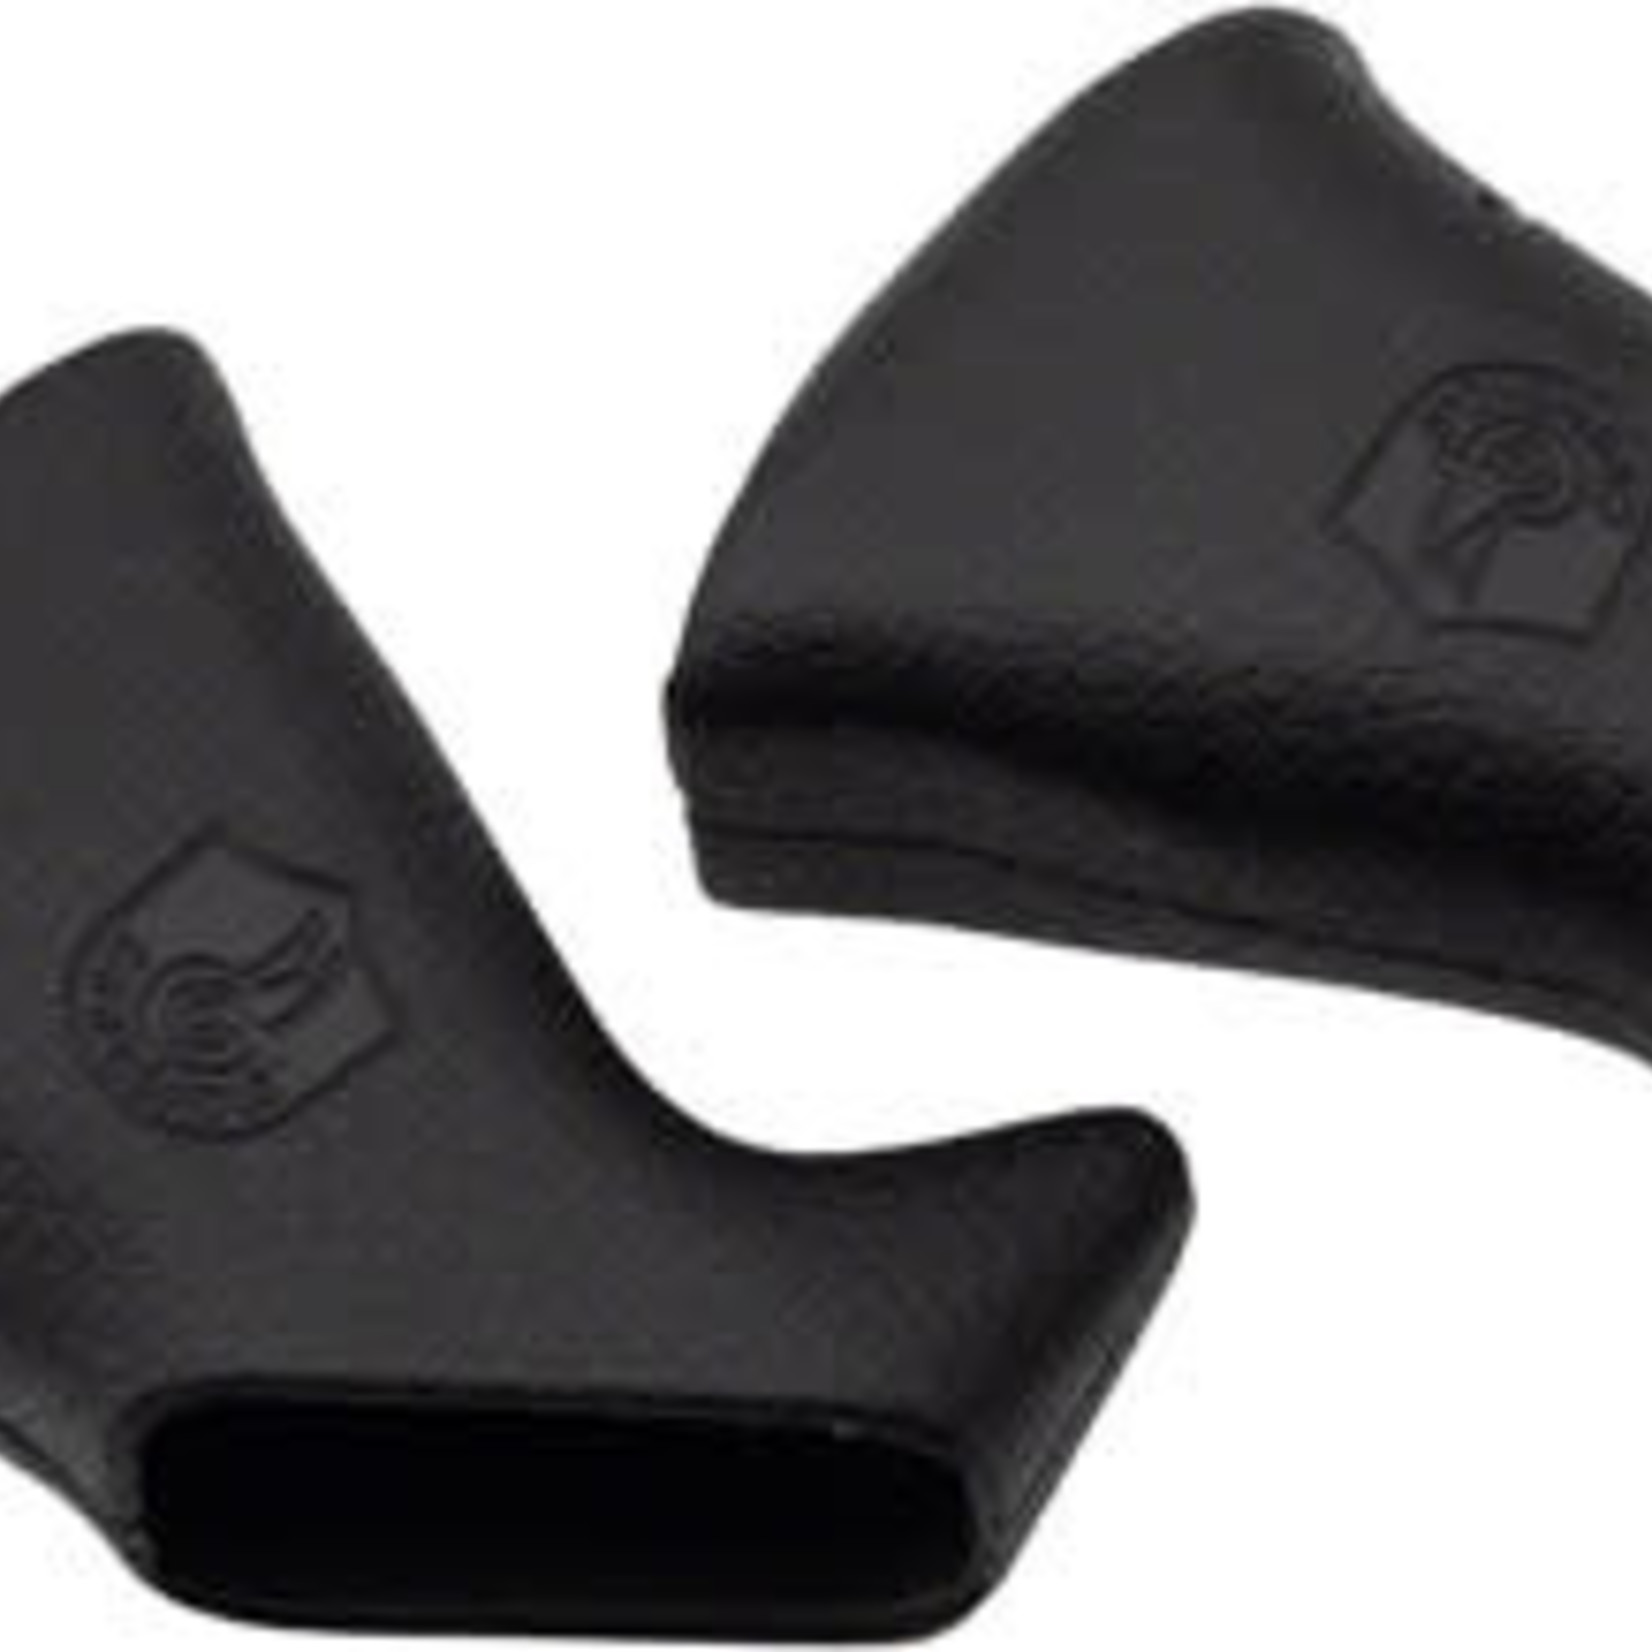 Campagnolo Campagnolo Ergopower Lever Hood Set -  For pre-1998 Record/Chorus and other models, Black